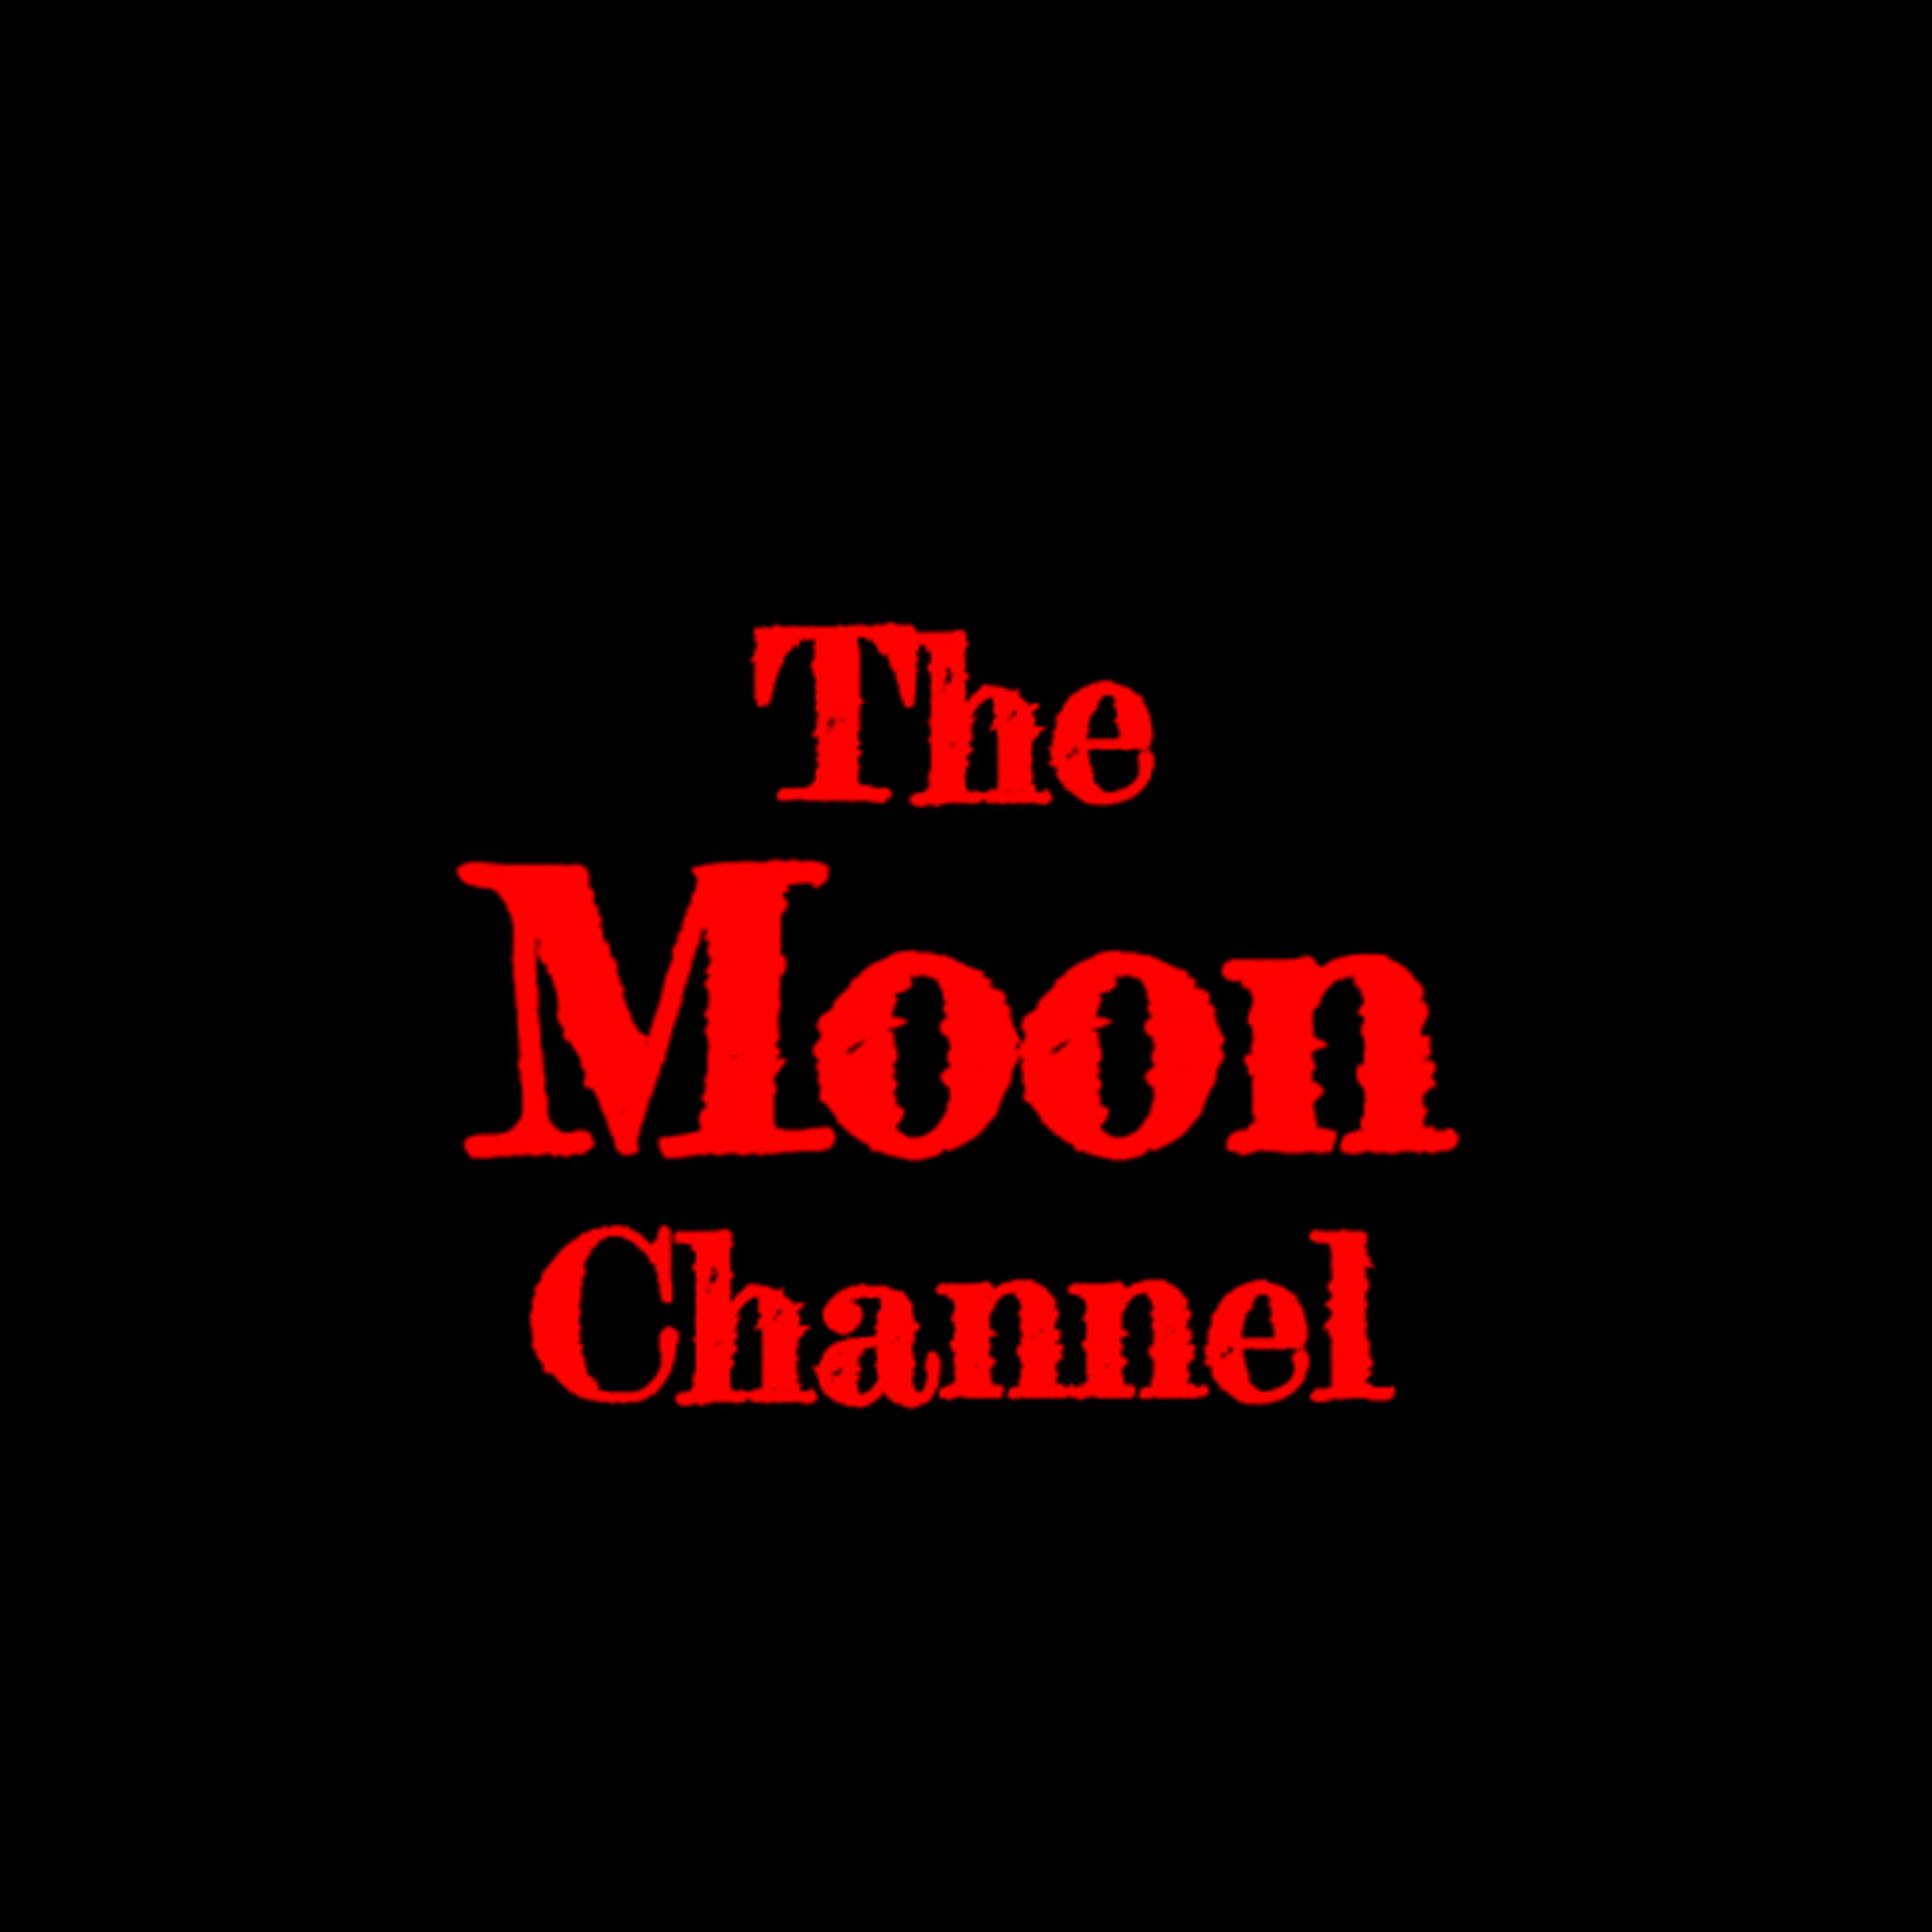 Moon Channel text